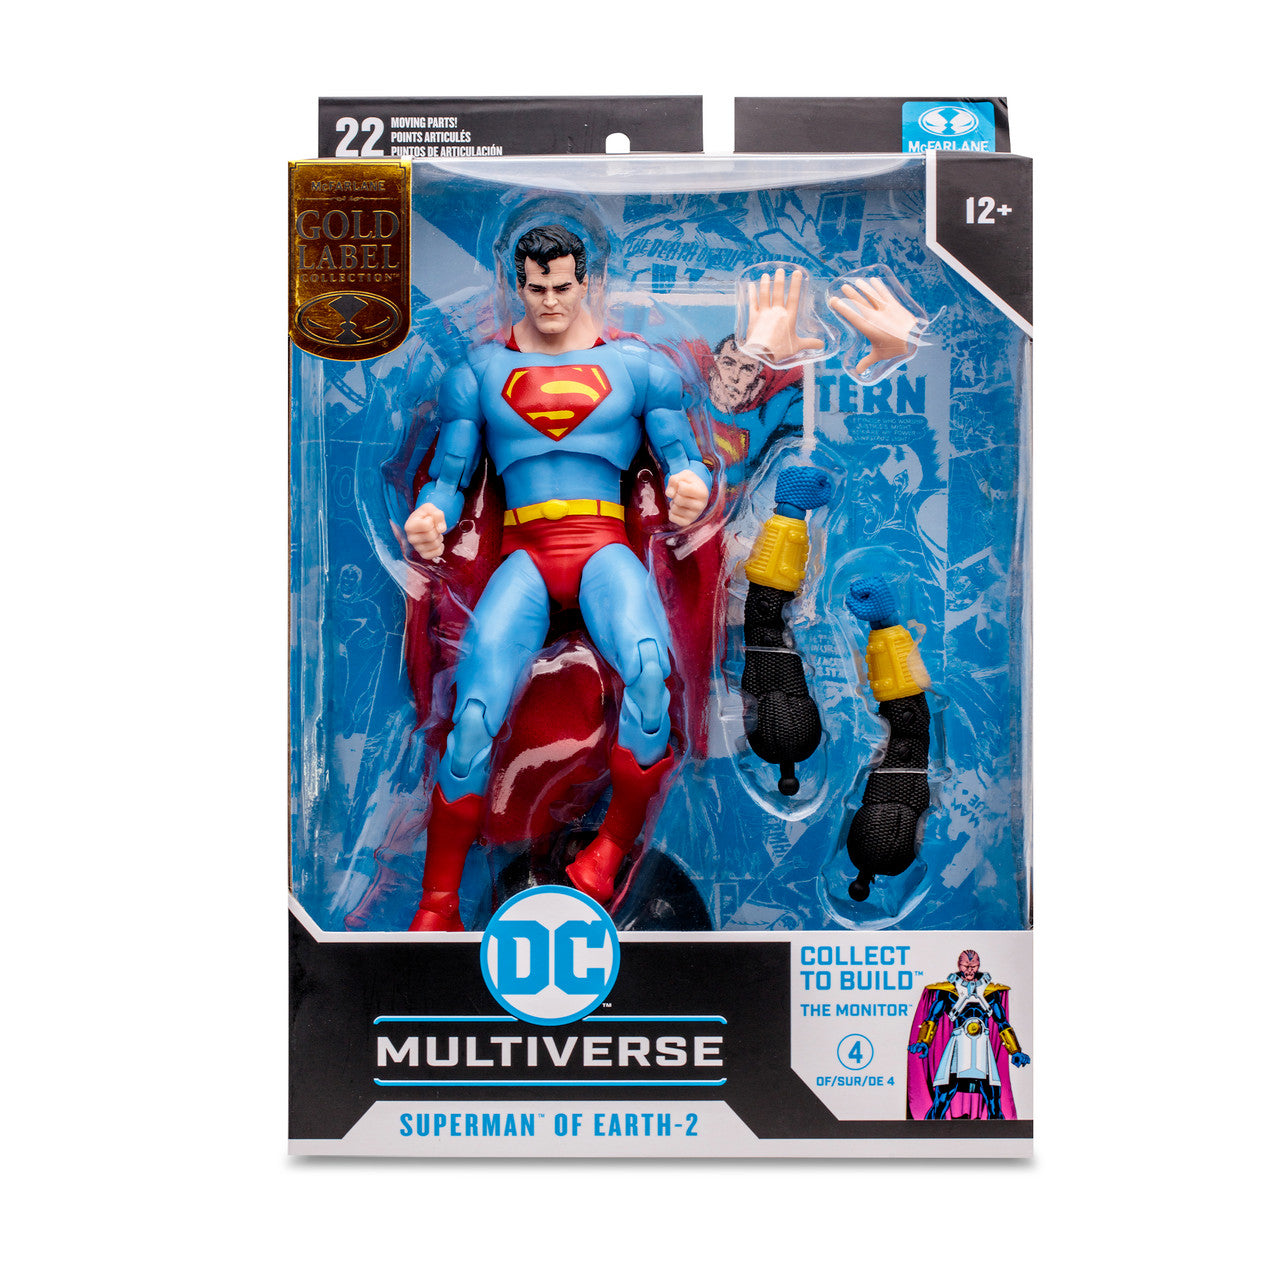 Superman of Earth-2 (Crisis on Infinite Earths) Gold Label 7" Build-A-Figure By Mcfarlane